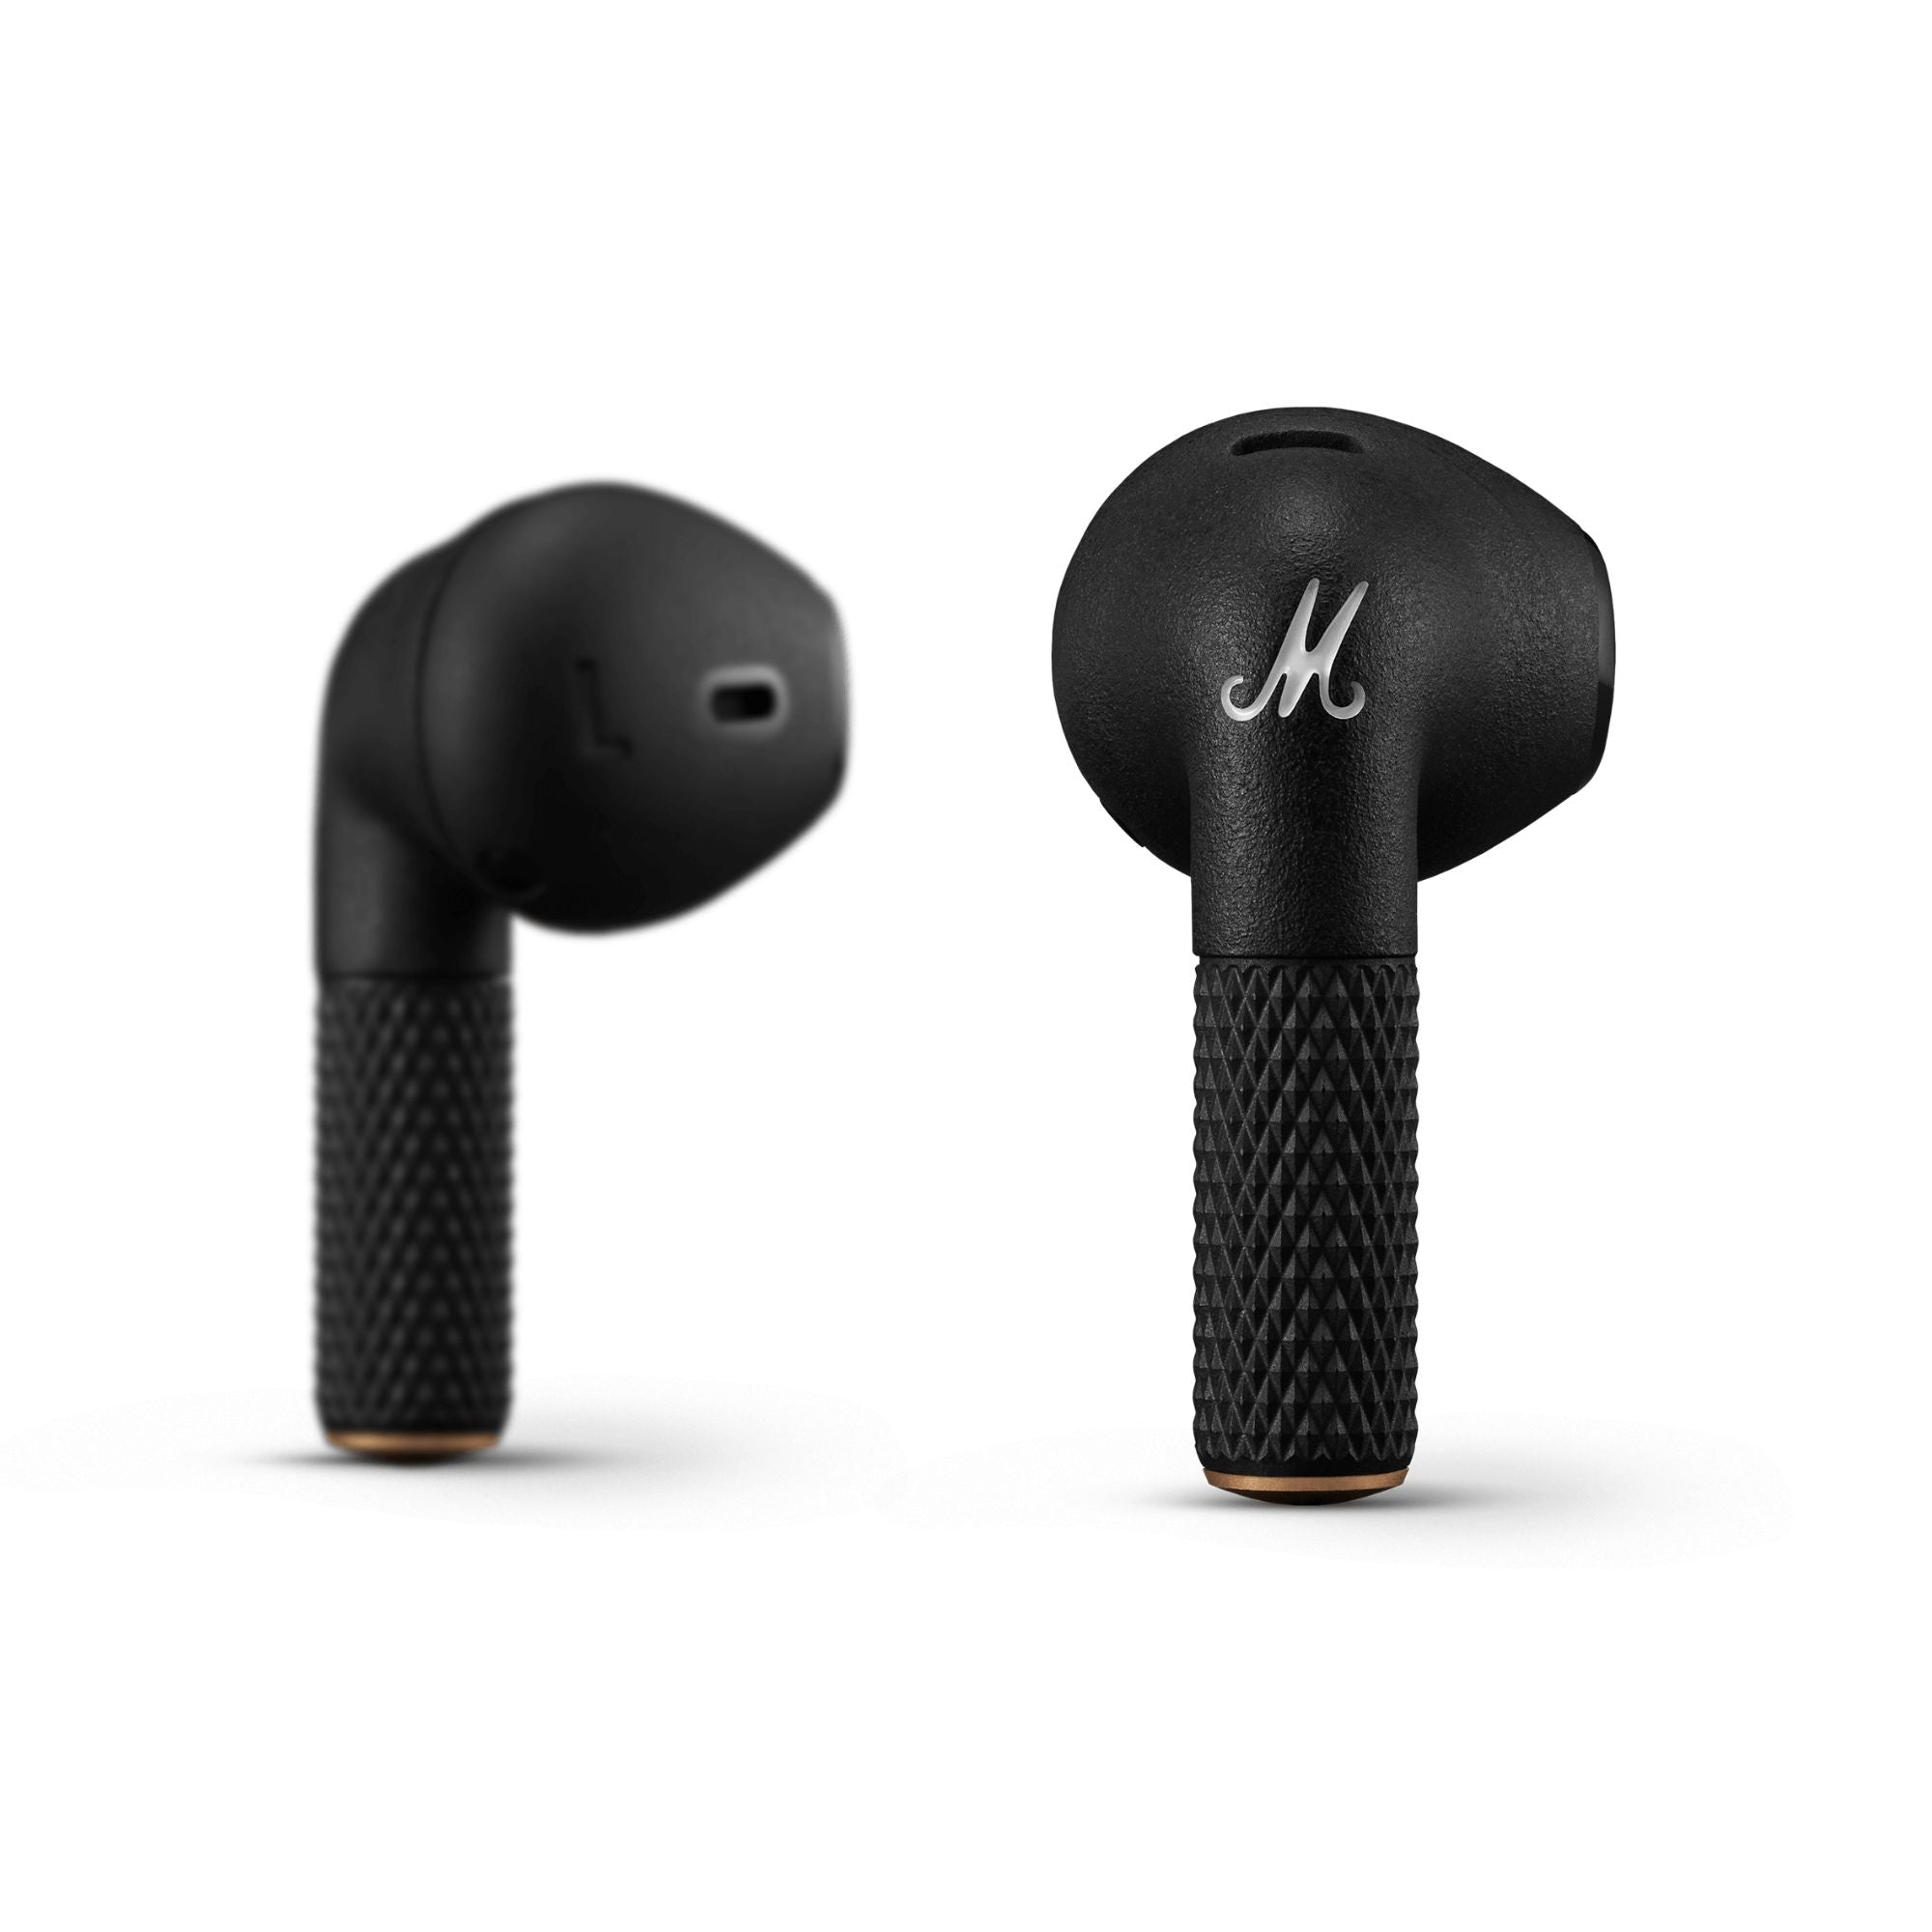 Marshall Minor III - All Sound, No Fuss With 25 Hours Of Wireless Playtime, Marshall, Earbuds - AVStore.in